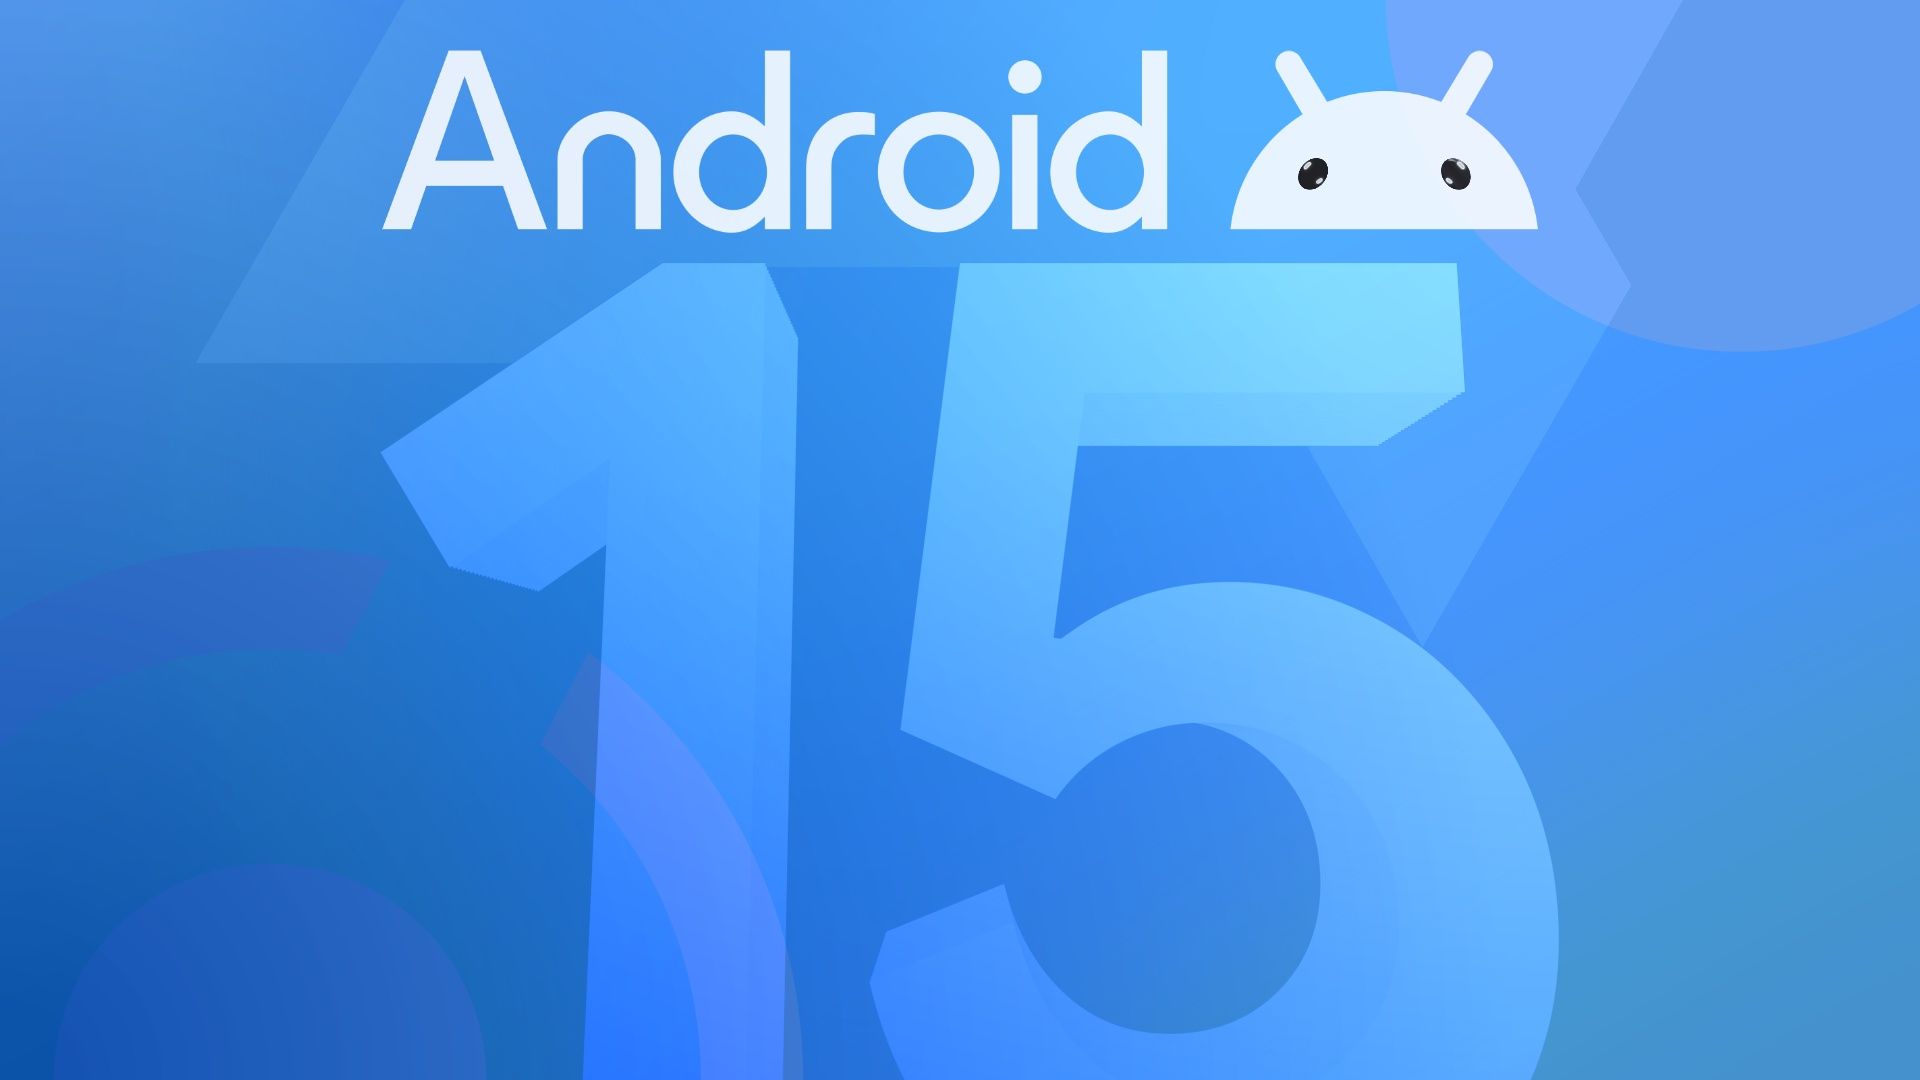 The Android 15 logo against a blue background